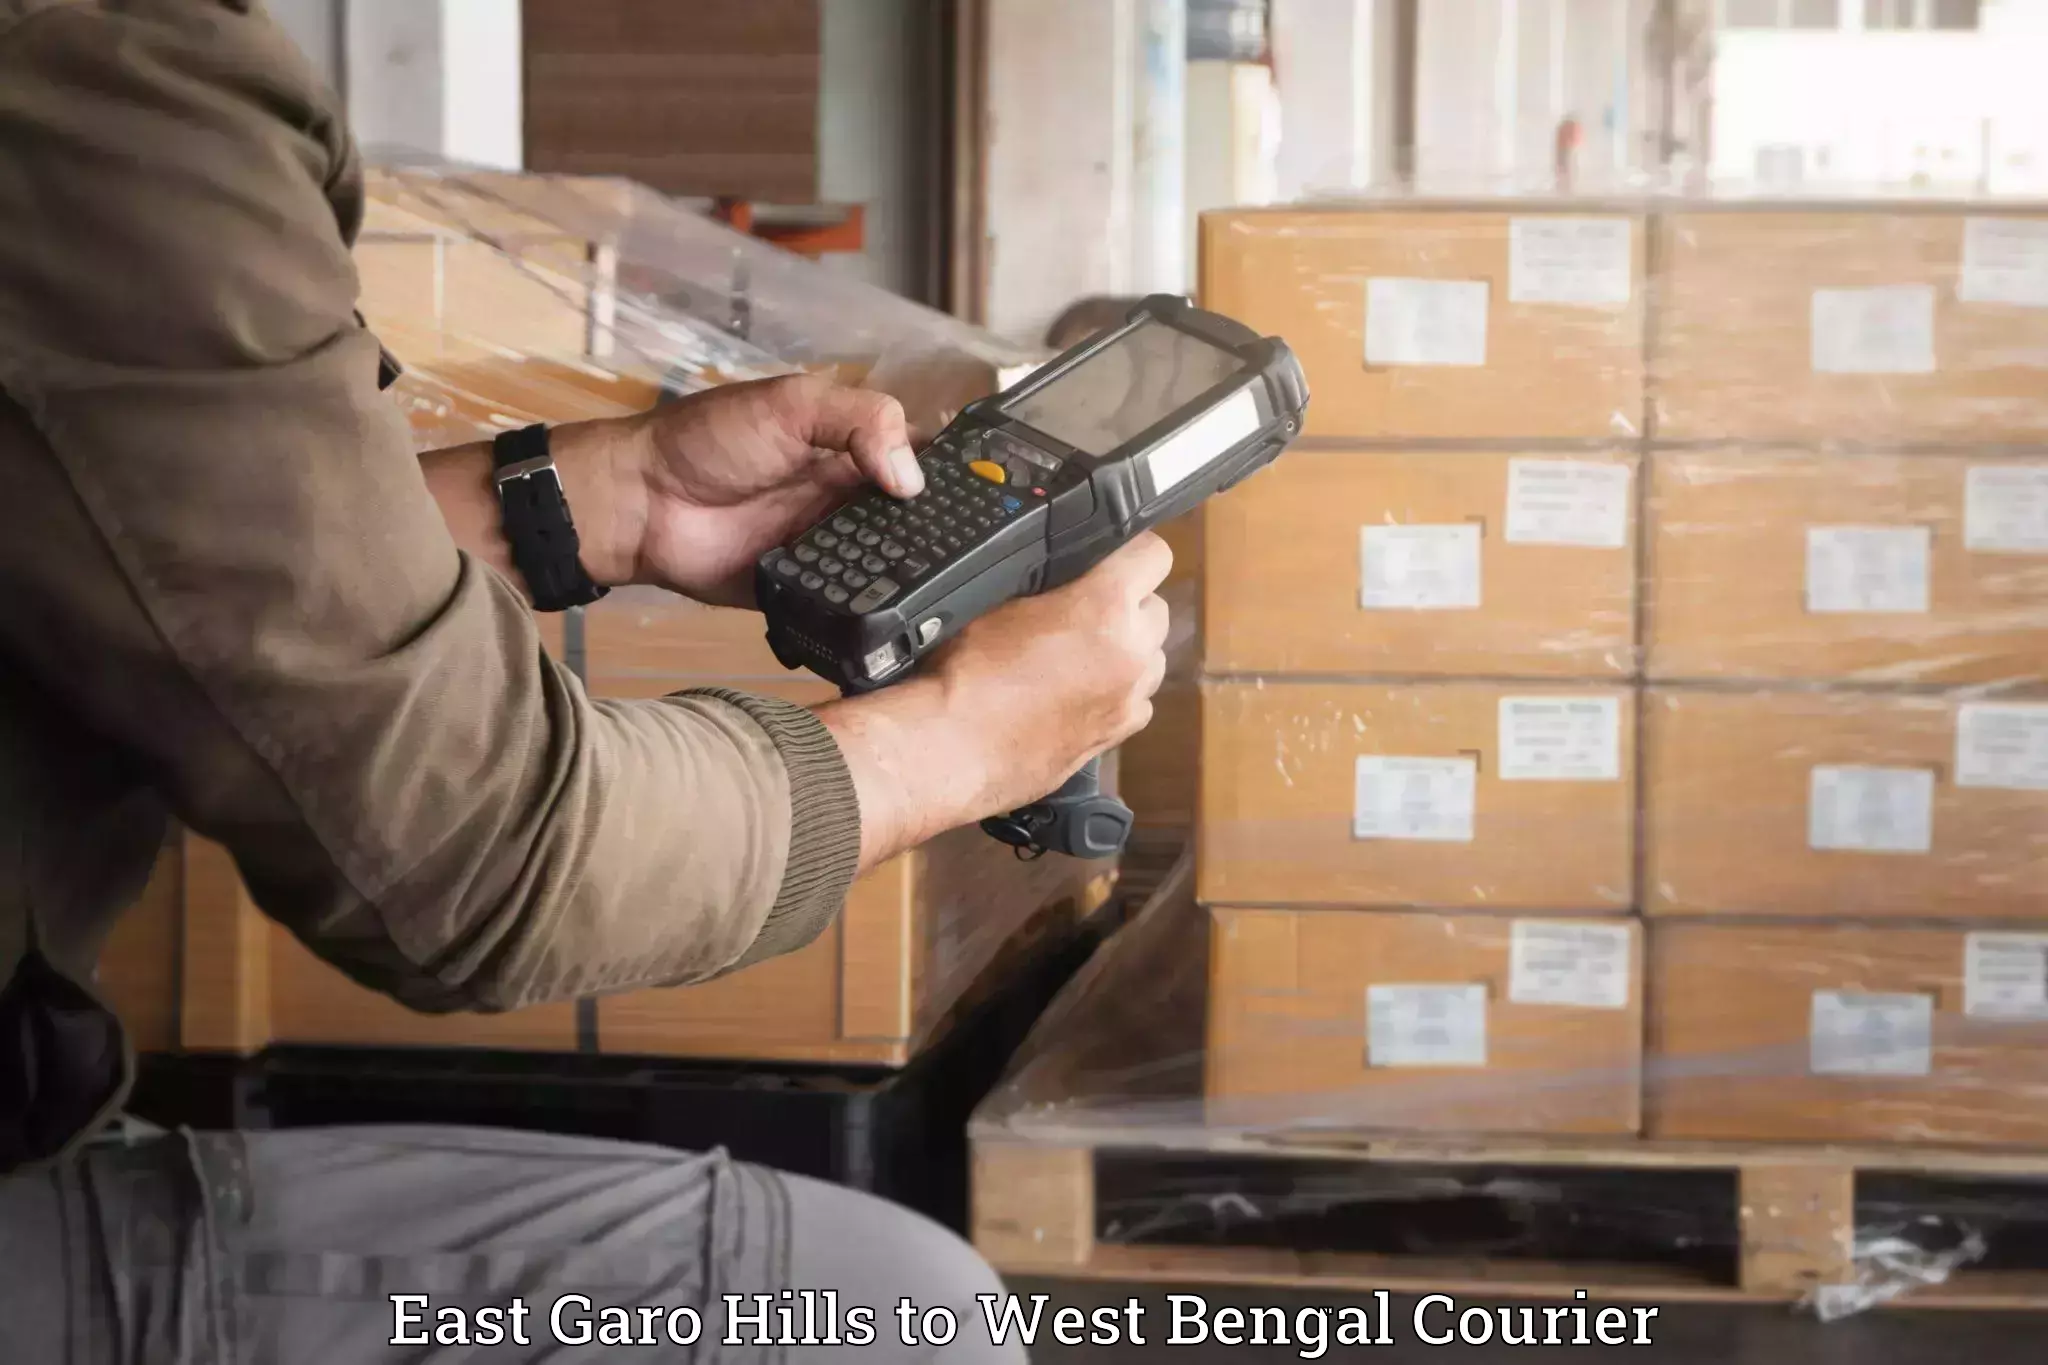 Luggage delivery app East Garo Hills to Onda